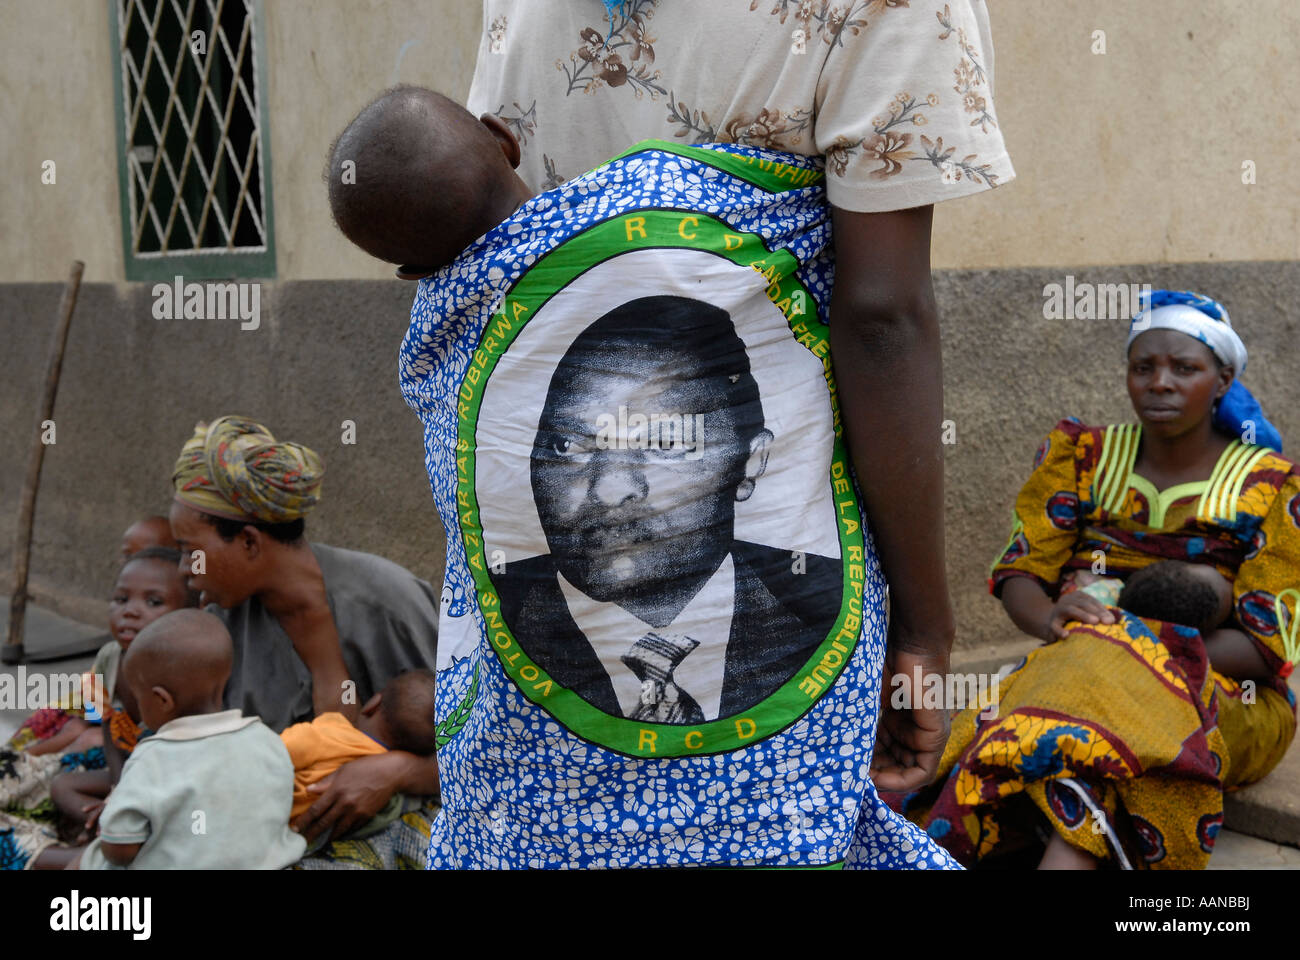 A woman carries a baby on her back using a kitenge bearing the figure of the Congolese President Joseph Kabila Kabange, in North Kivu province, Congo Stock Photo